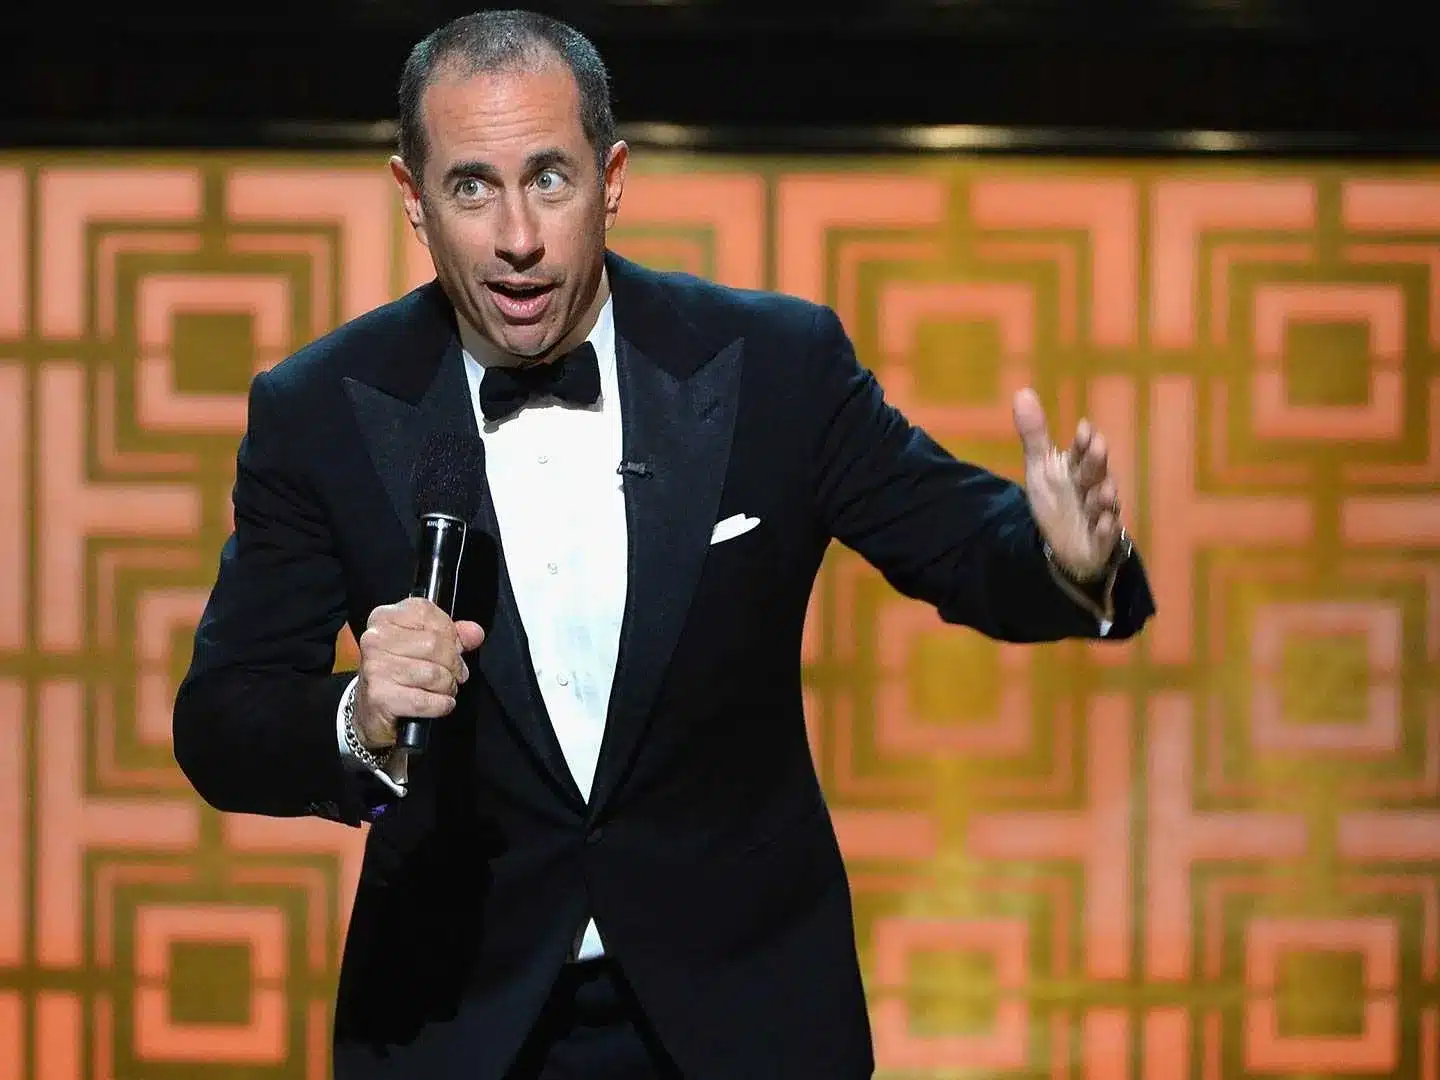 How Wealthy is World’s Richest Comedian Jerry Seinfeld?